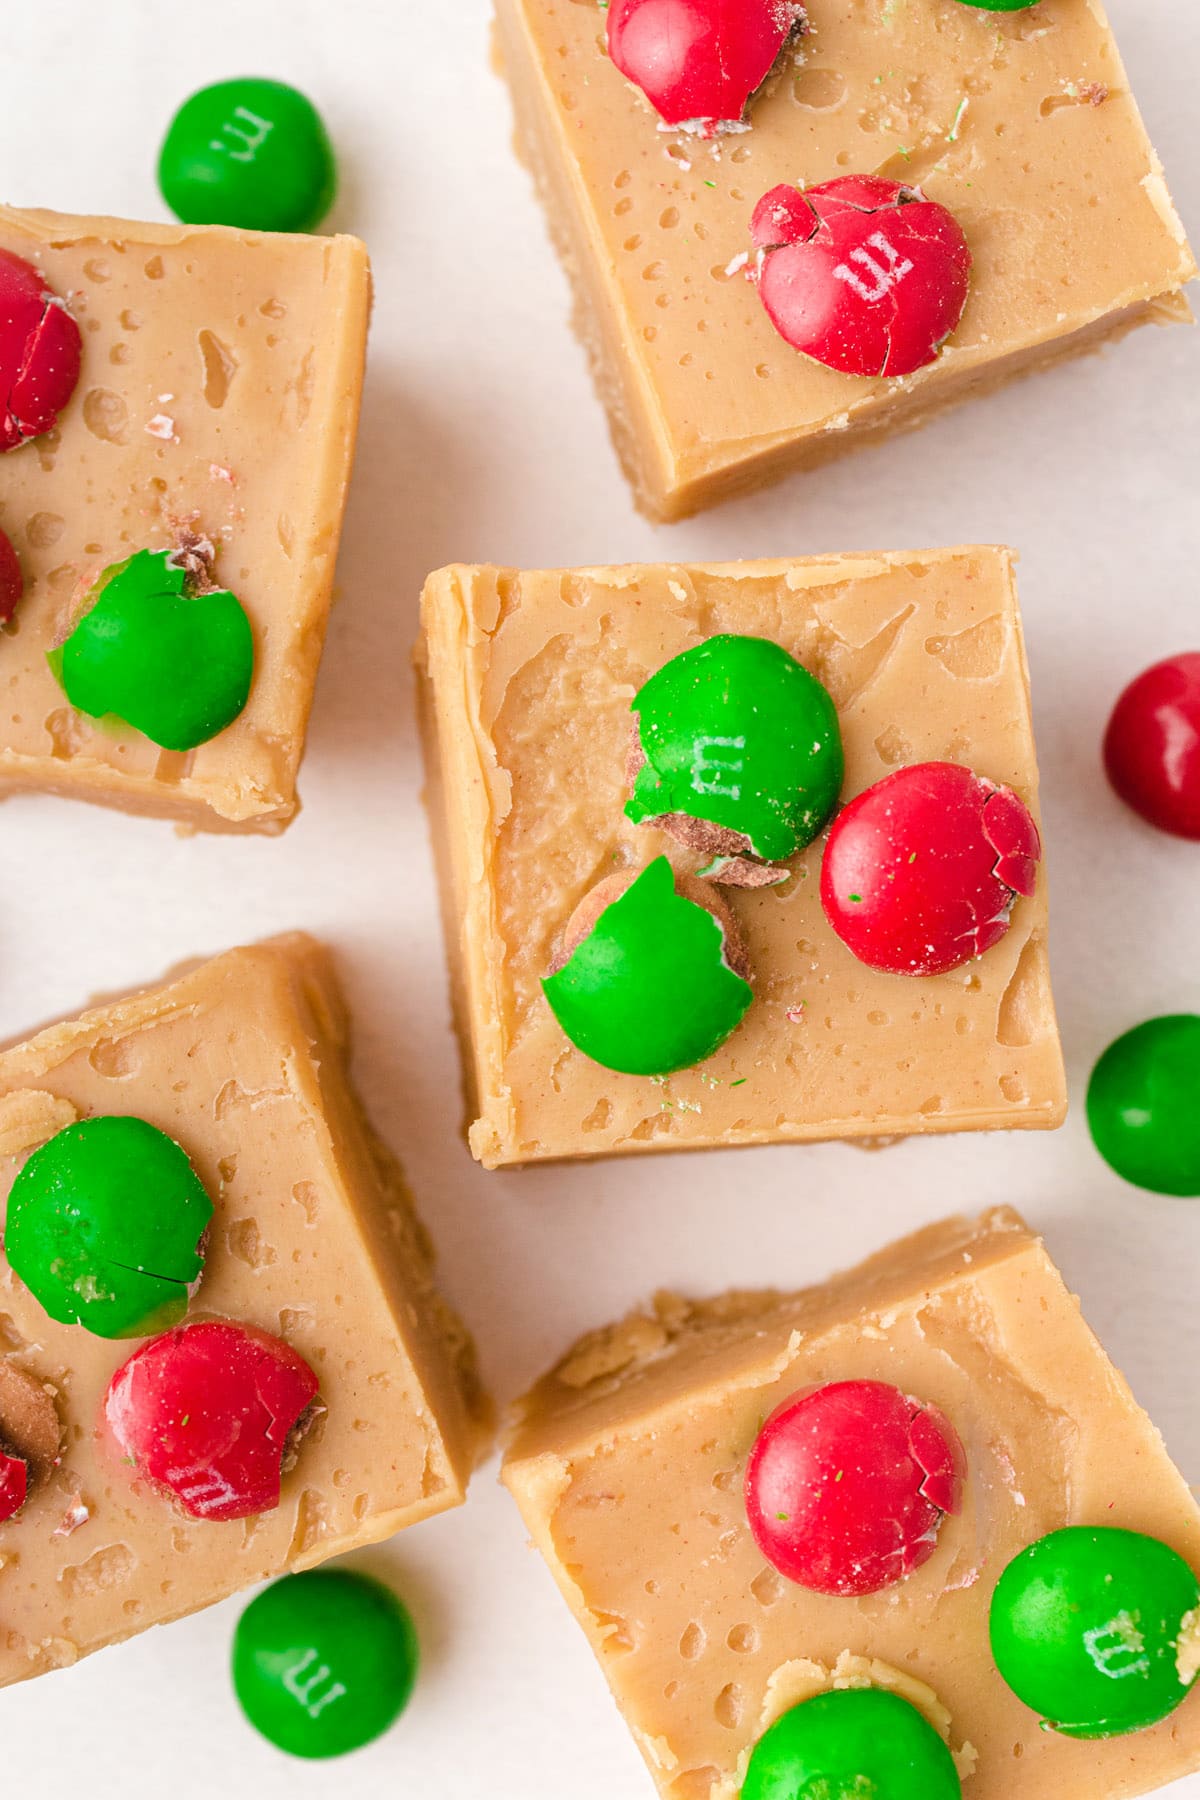 peanut butter fudge with red and green m&m's